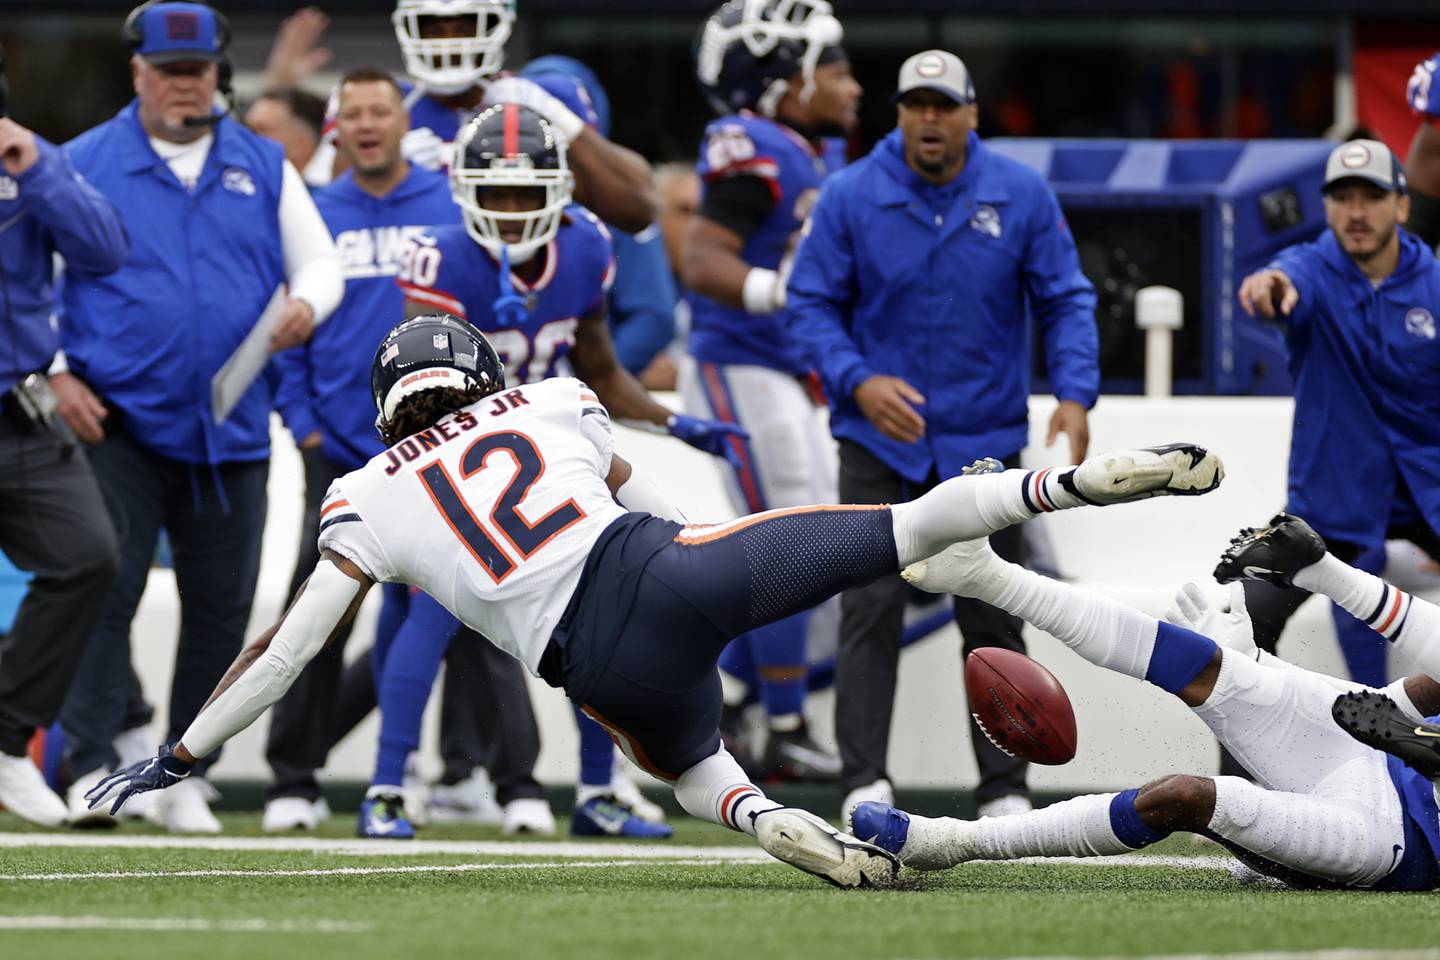 Bears returner Velus Jones muffs a punt late in the game against the Giants on Sunday in East Rutherford, N.J. 